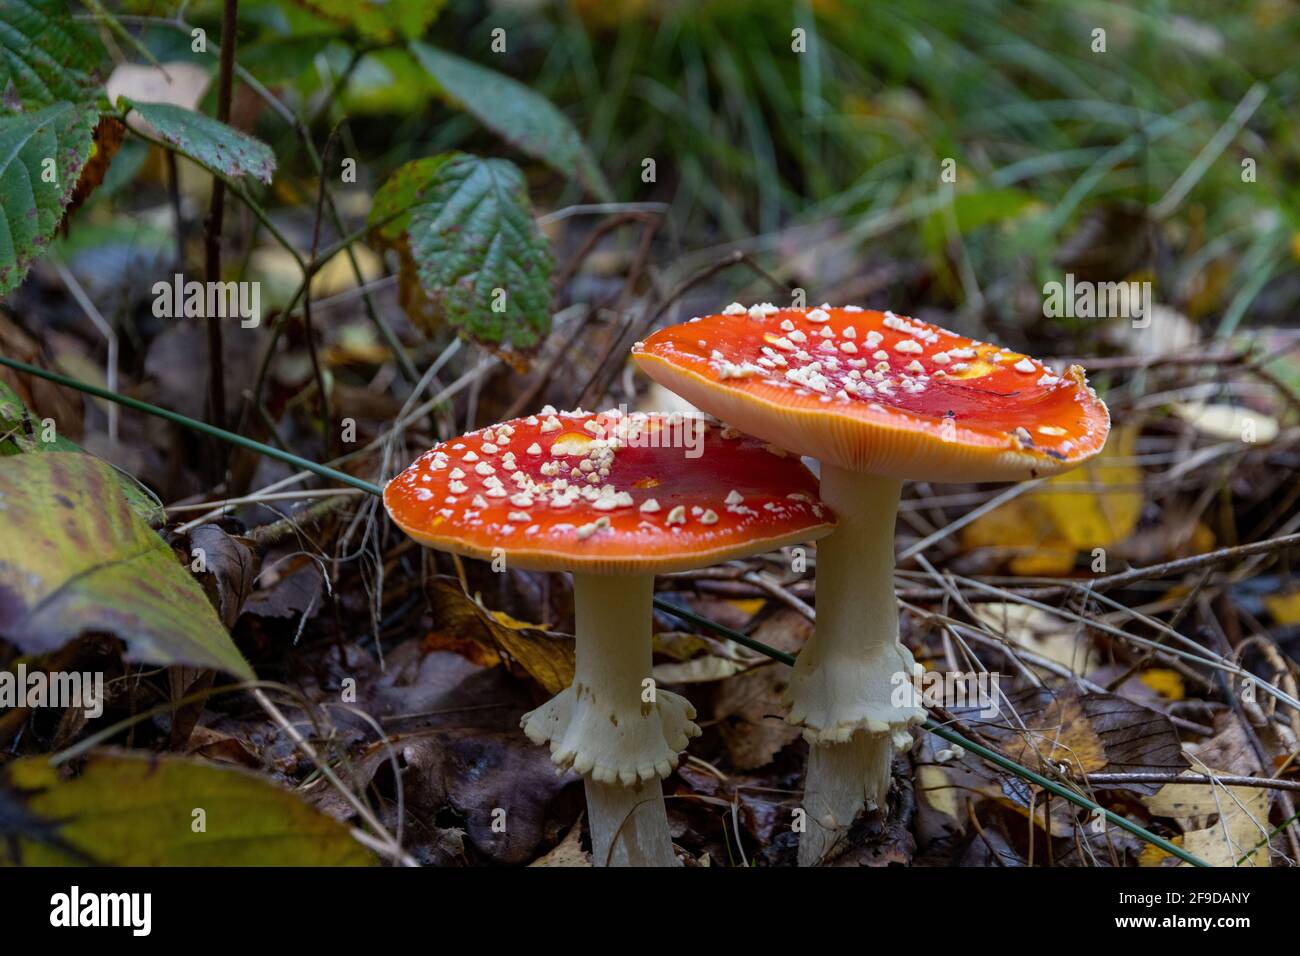 The red poisonous mushroom boletus in the forest Stock Photo